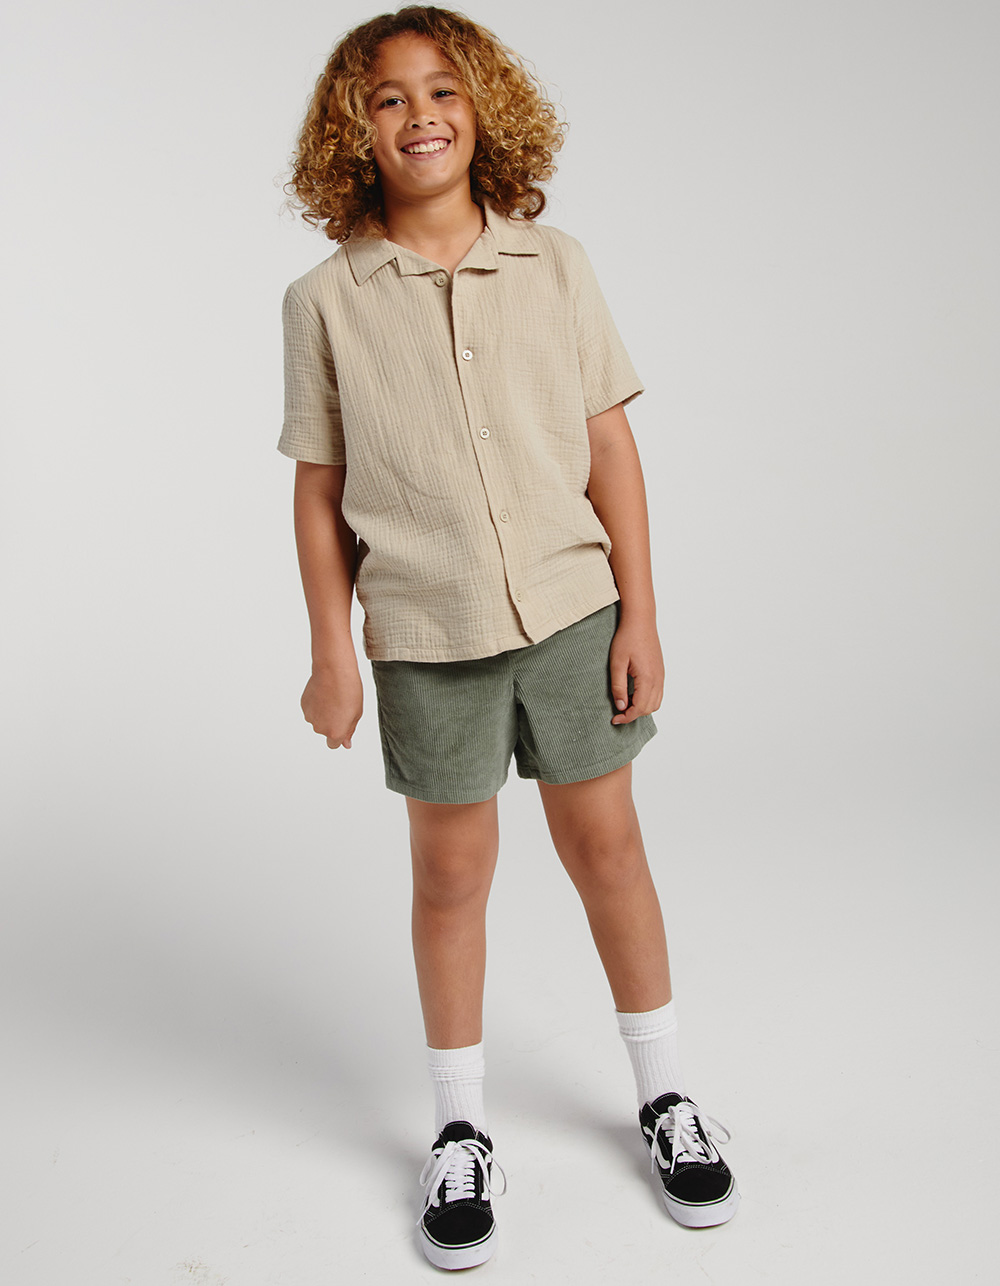 RSQ Boys Pull On Cord Shorts